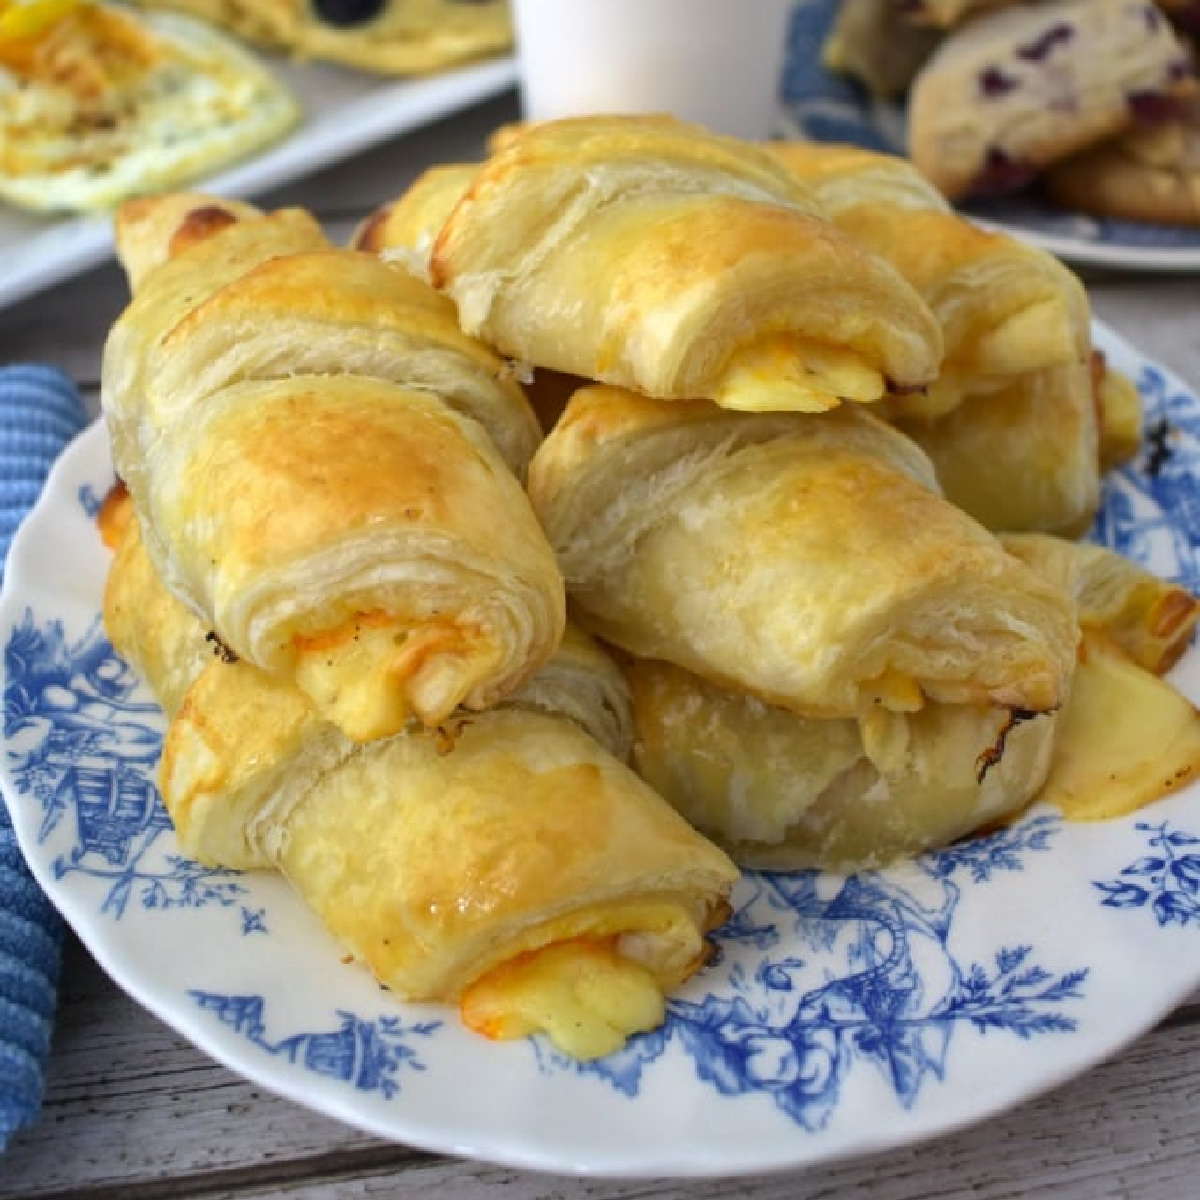 Ham and Cheese Croissants piled onto a blue and white plate.